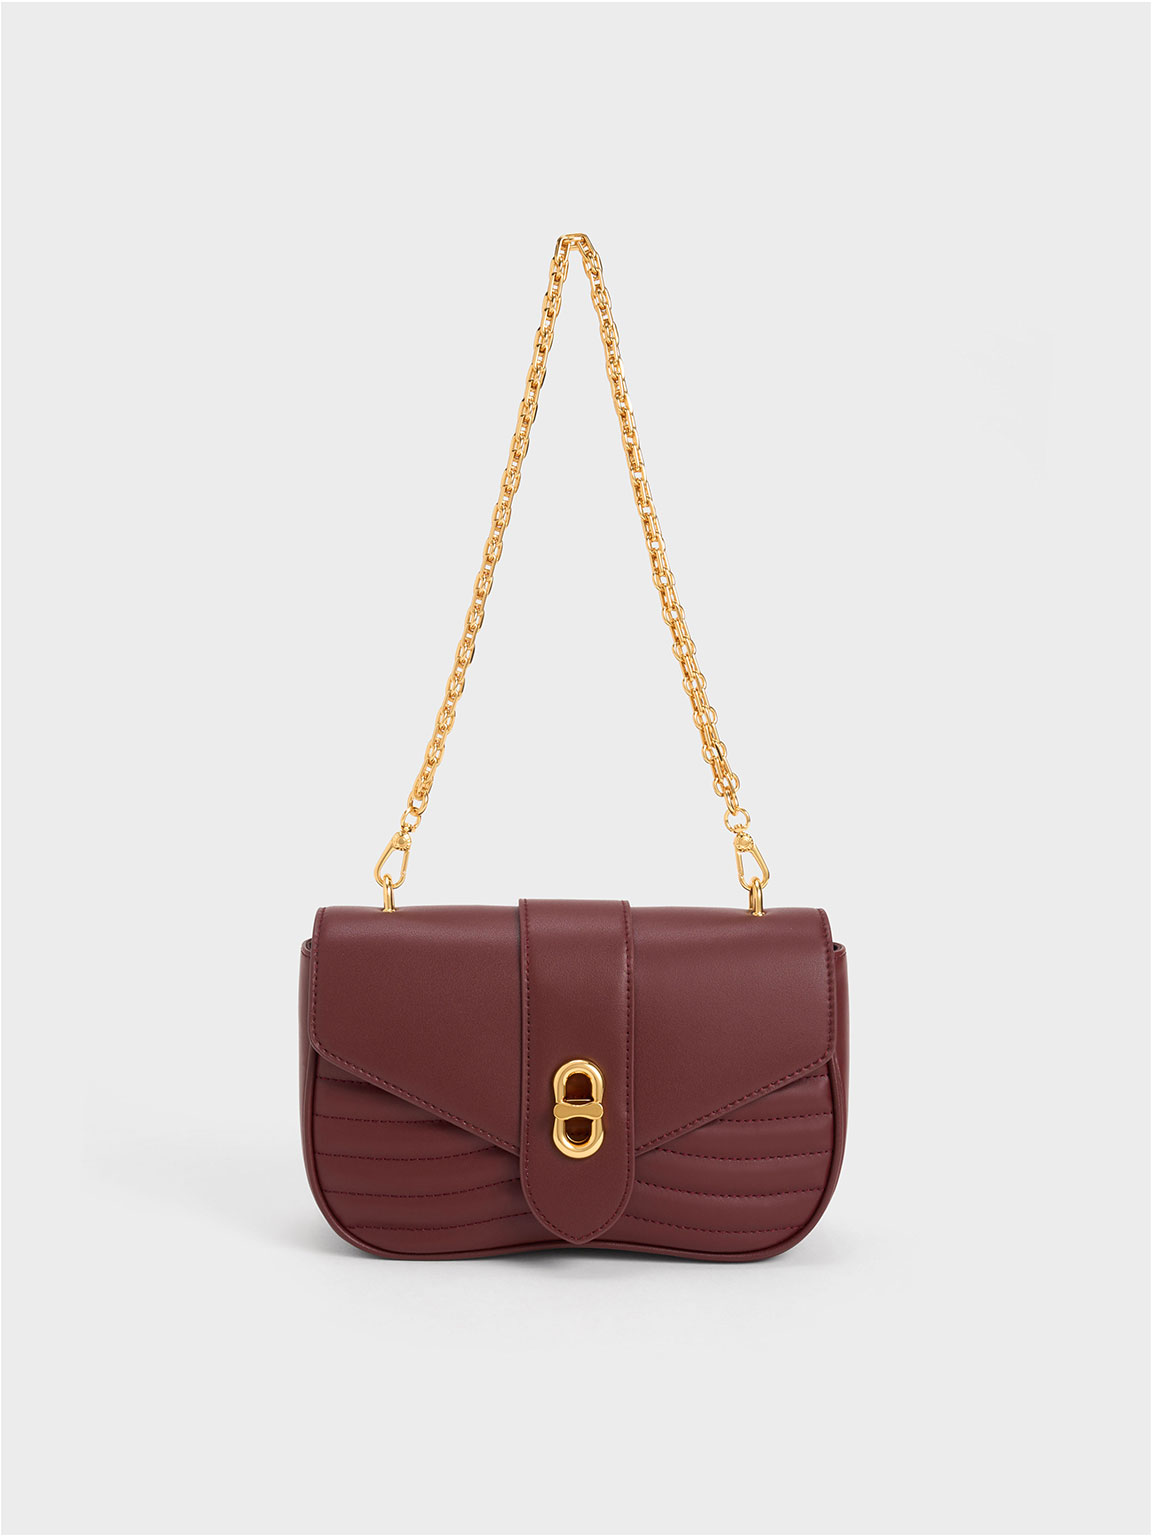 Charles & Keith Aubrielle Panelled Crossbody Bag In Dark Chocolate